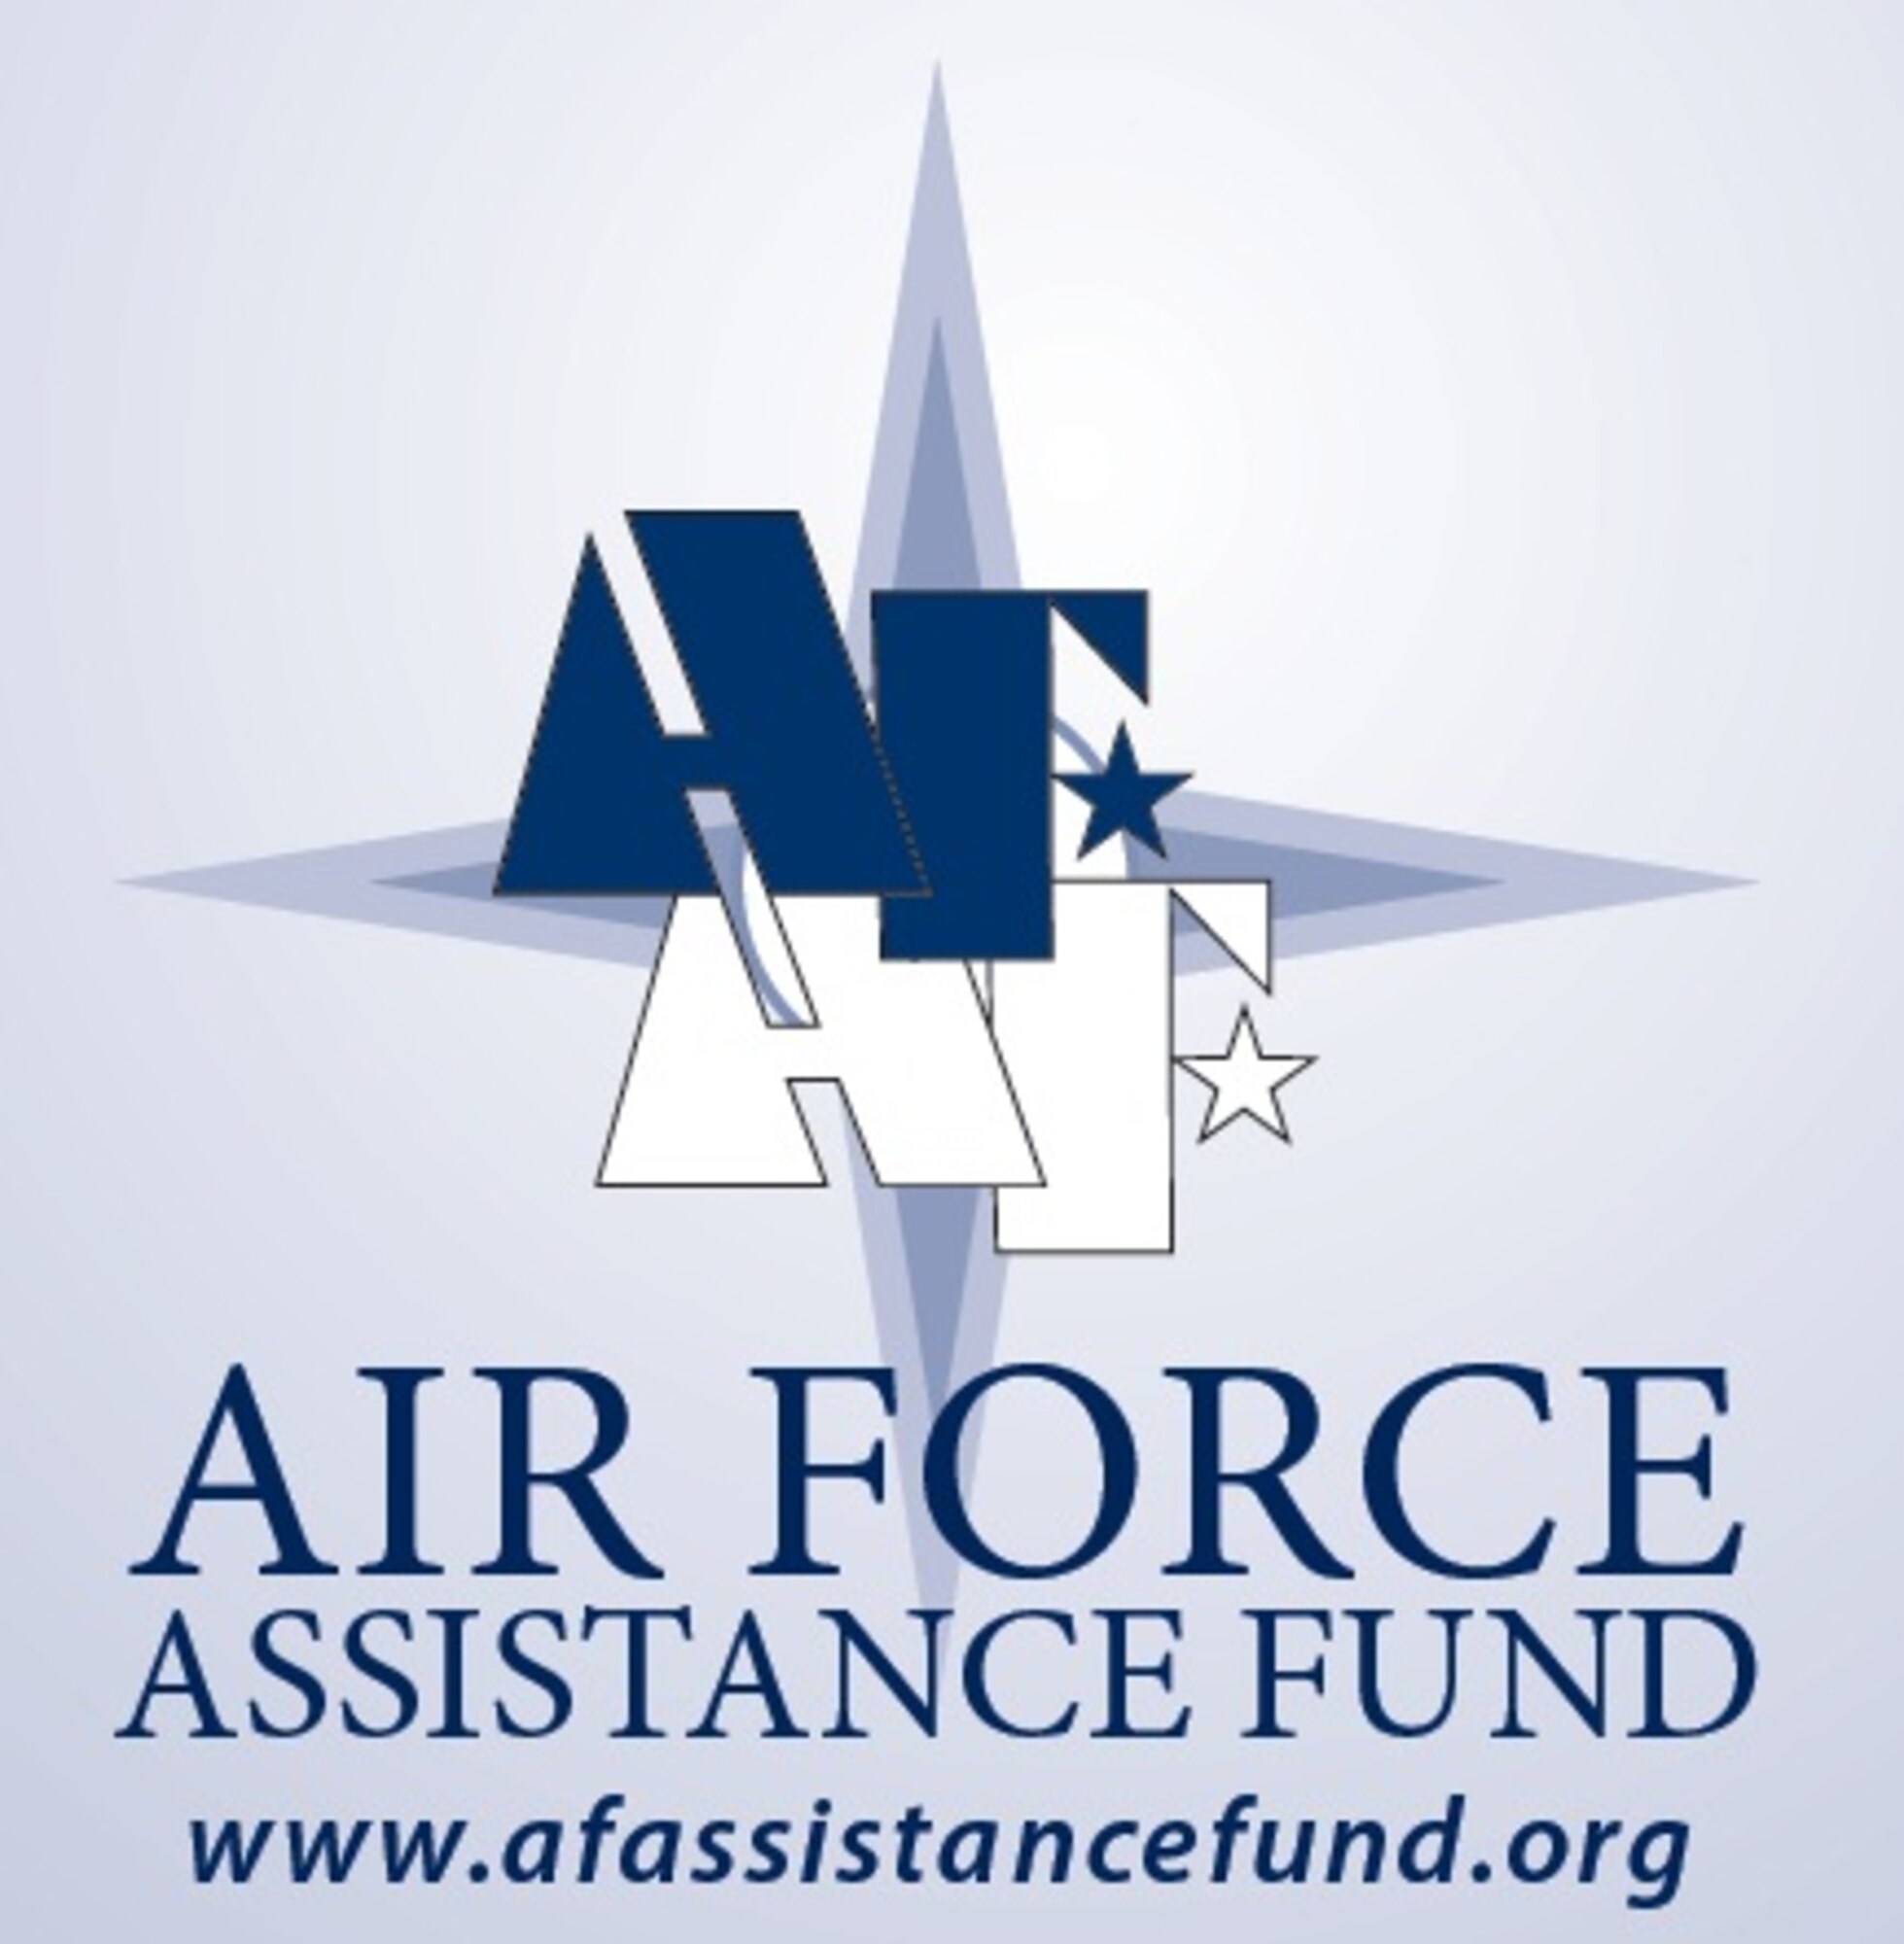 (Air Force Assistance Fund courtesy graphic)